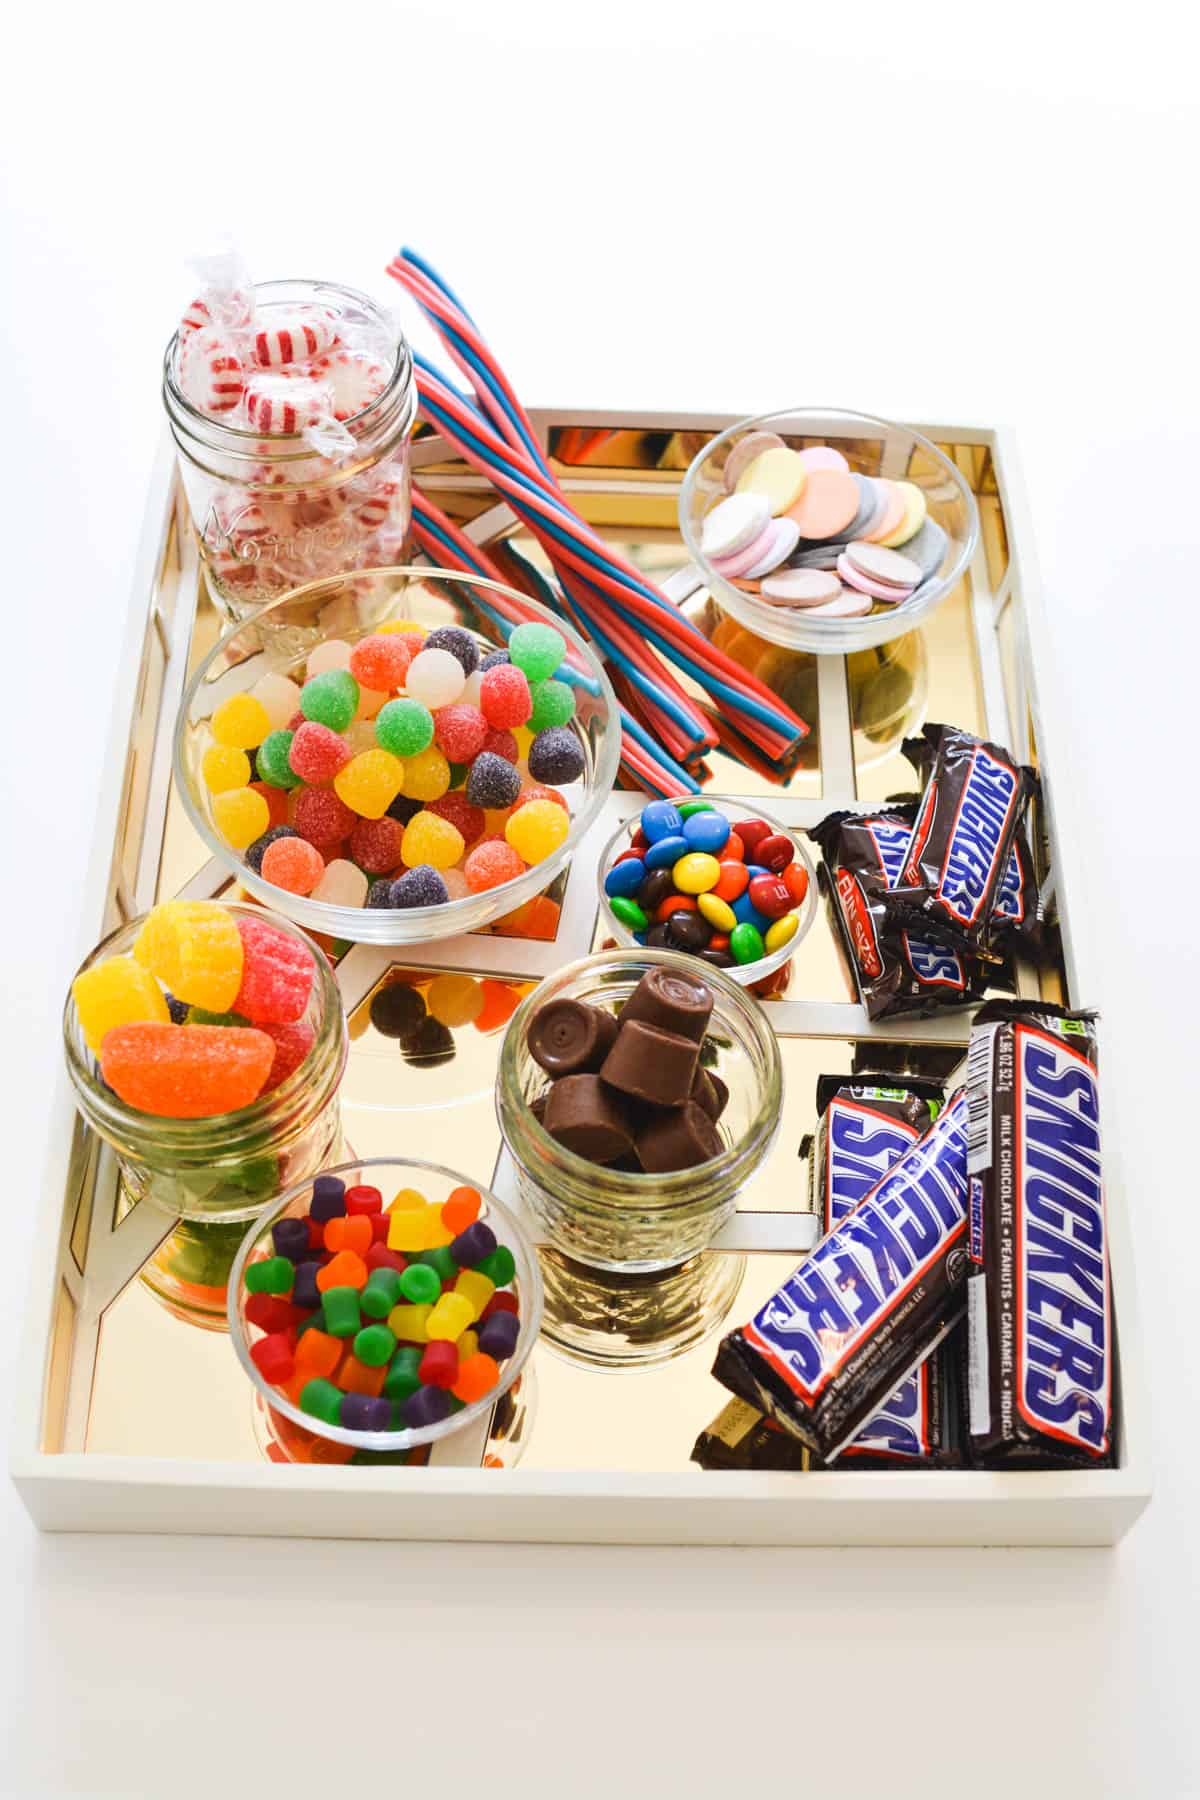 A tray full of candy on a table.